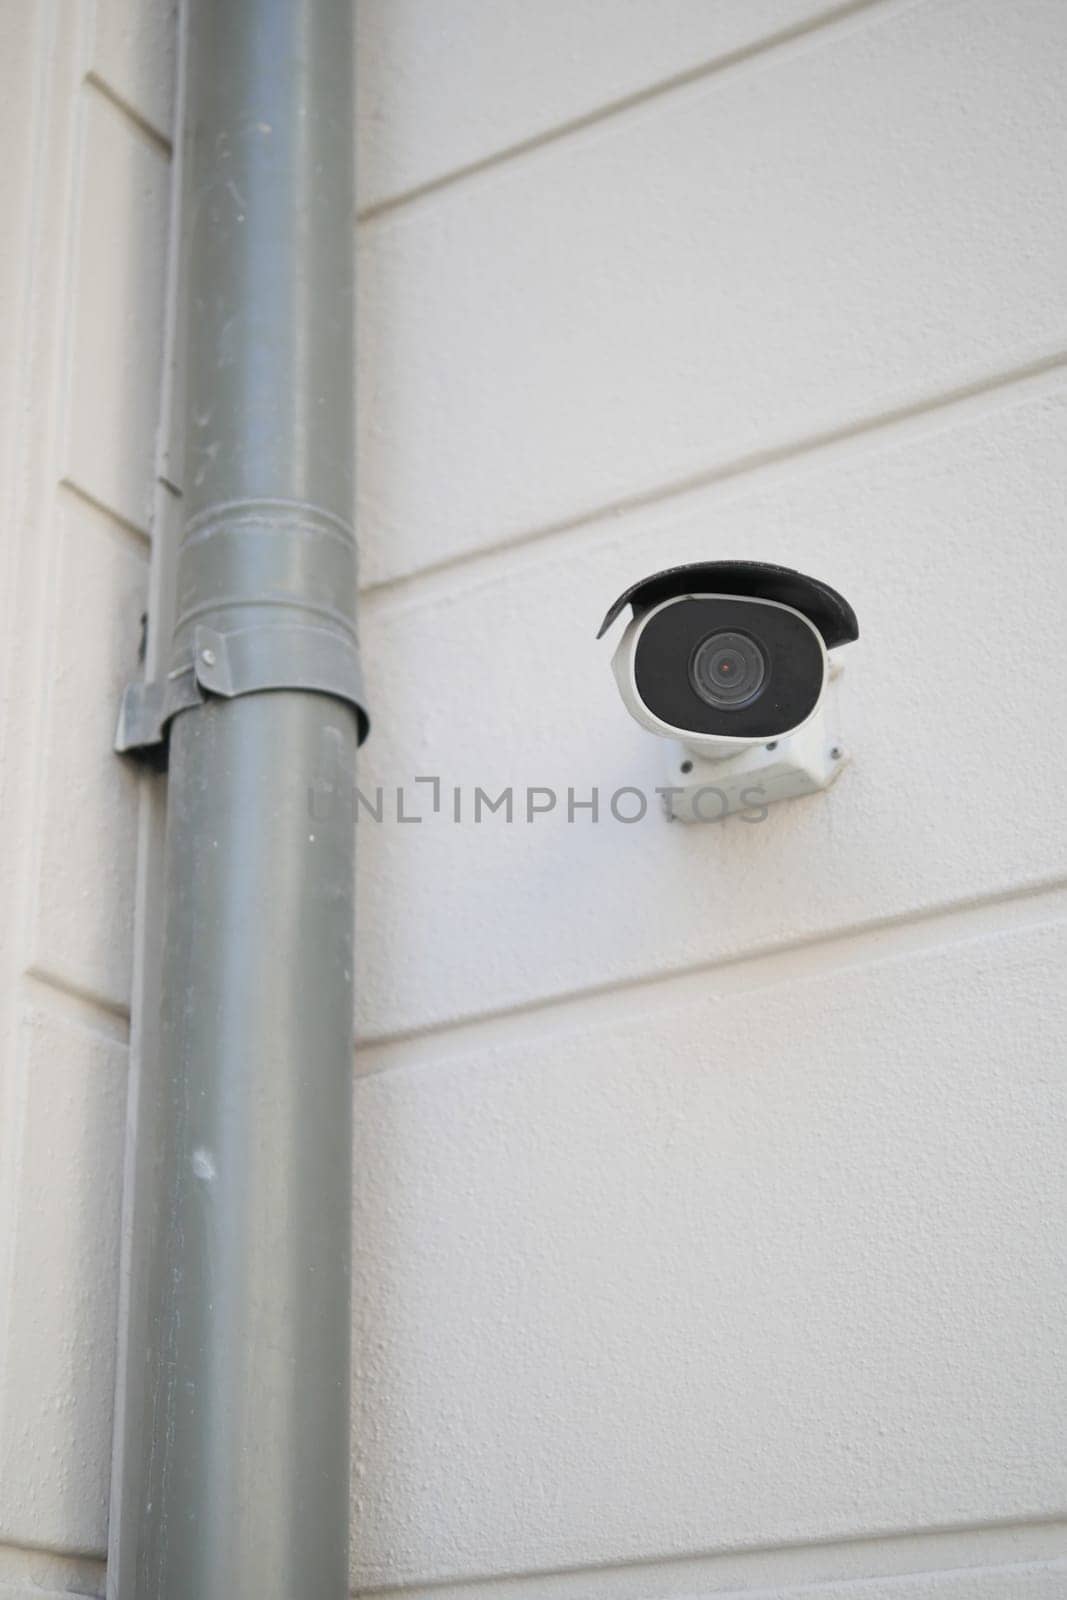 CCTV security camera operating outdoor by towfiq007